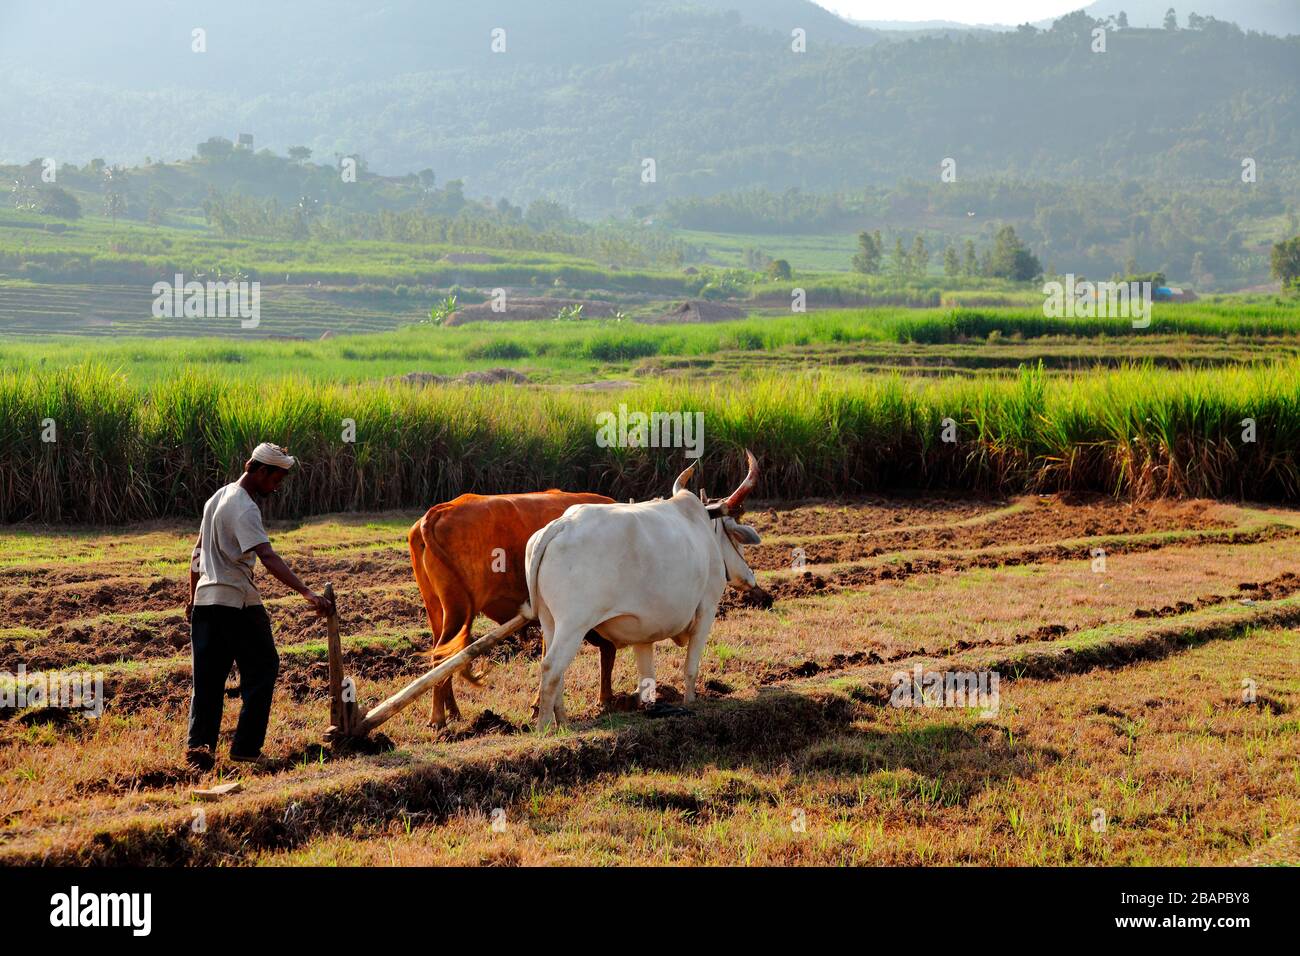 Organic farming in India.Ploughing and flattening of paddy field with oxen in rural India Stock Photo